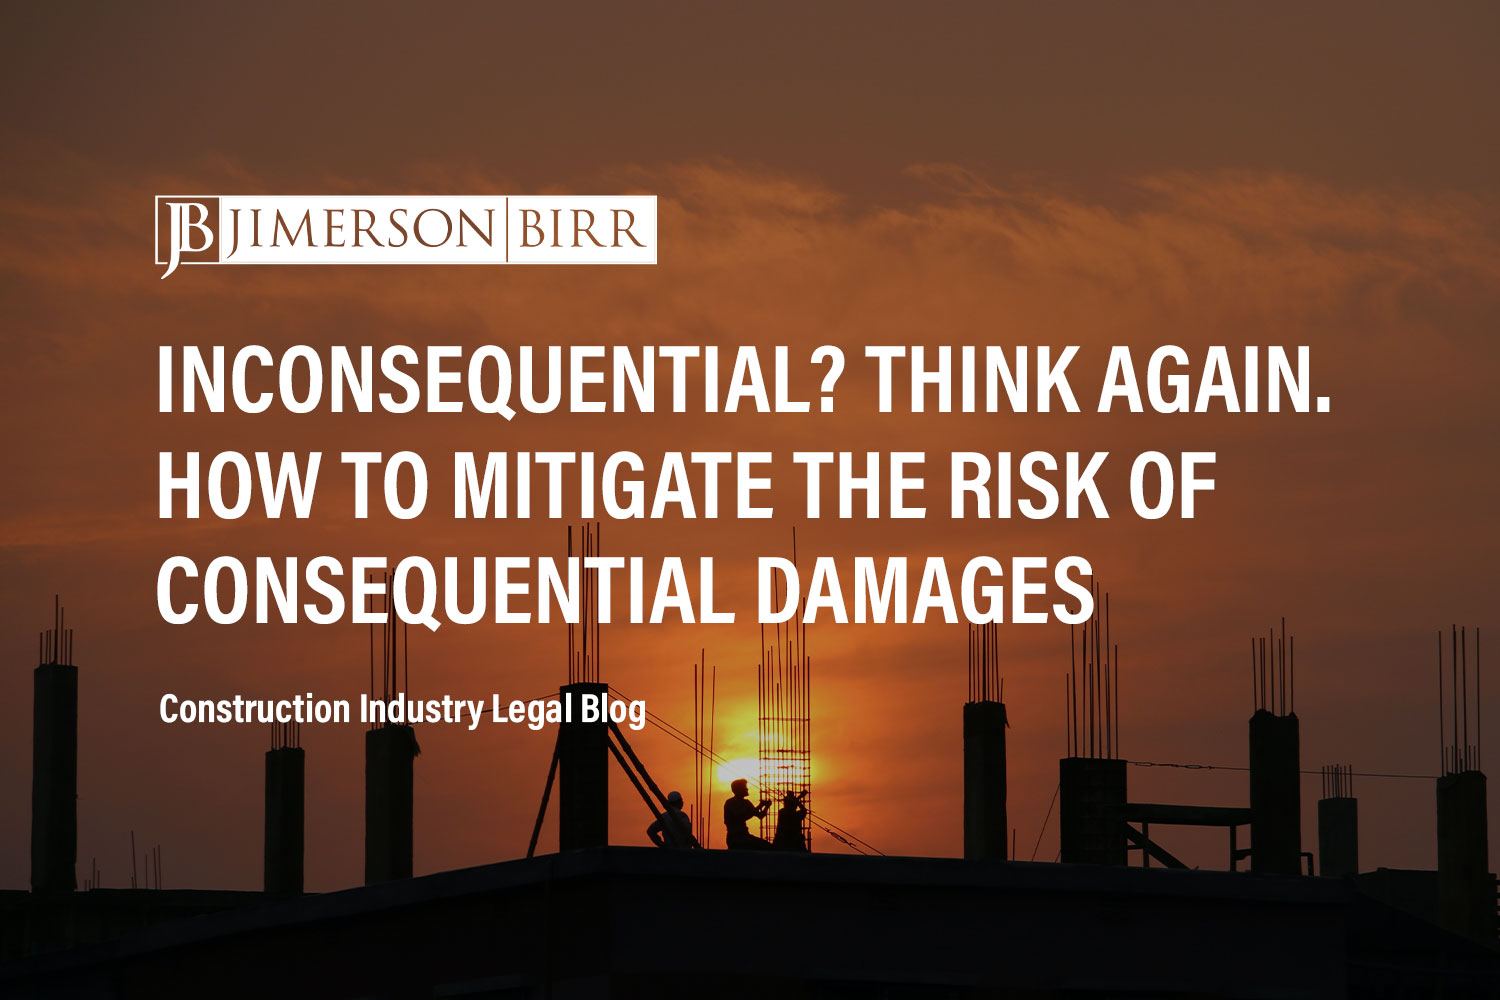 Construction Contractors Beware the Consequences of Consequential Damages